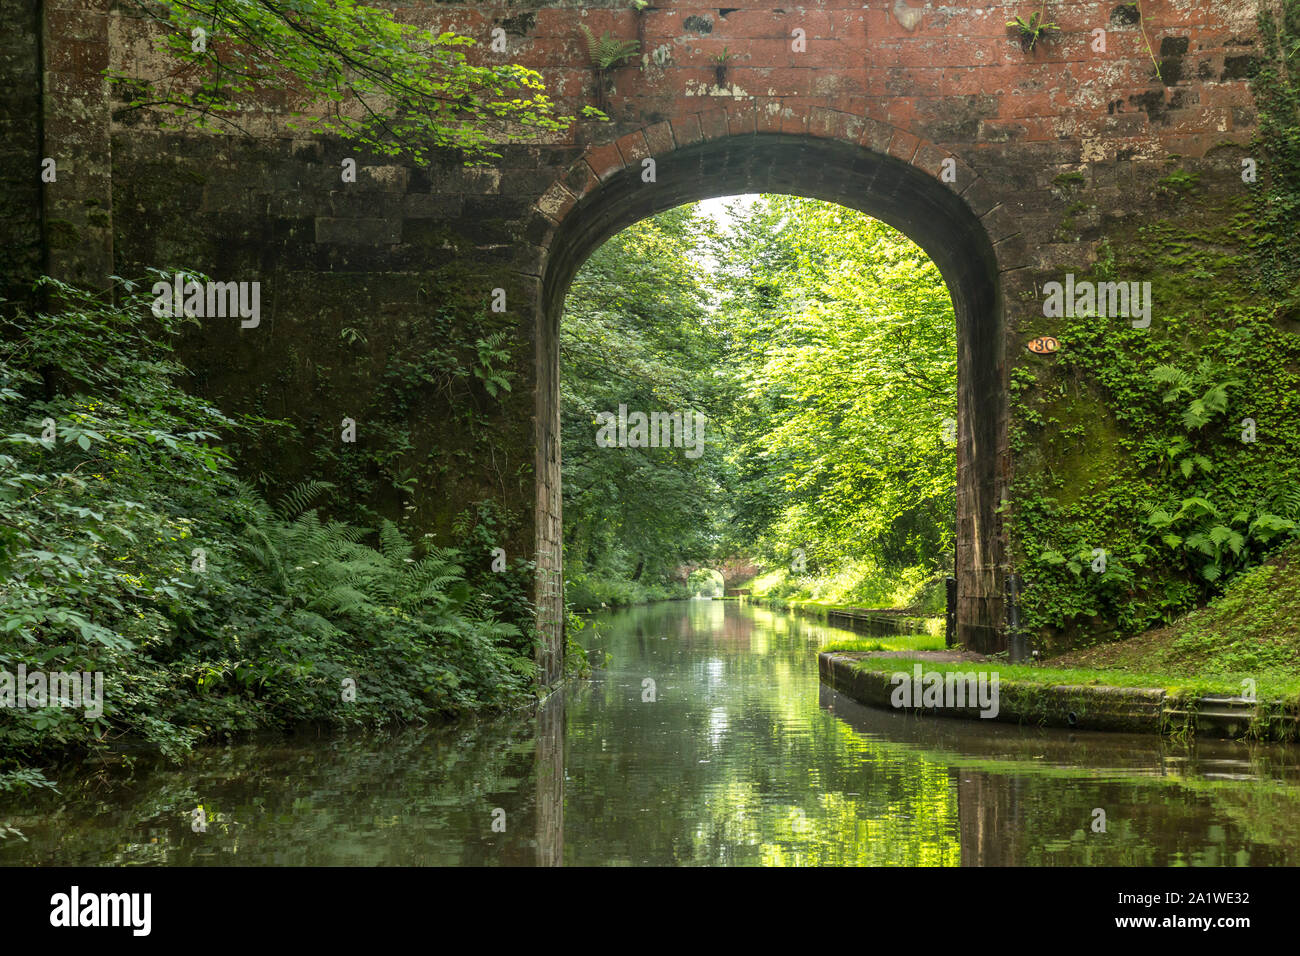 A brick built bridge over  The Shropshire Union Canal in England. Stock Photo